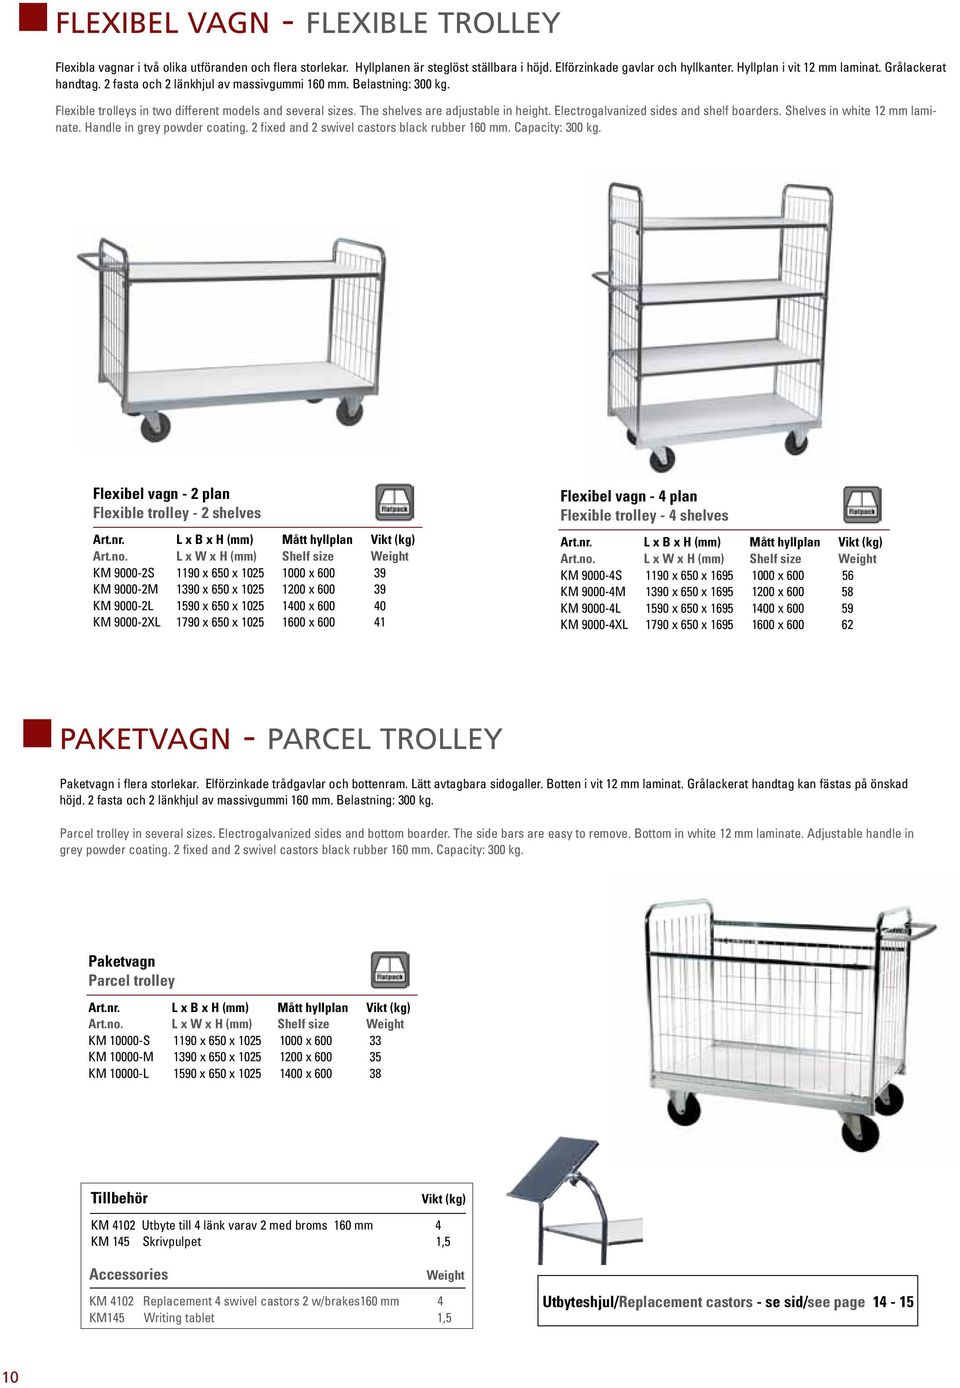 Electrogalvanized sides and shelf boarders. Shelves in white 12 mm laminate. Handle in grey powder coating. 2 fixed and 2 swivel castors black rubber 160 mm. Capacity: 300 kg.